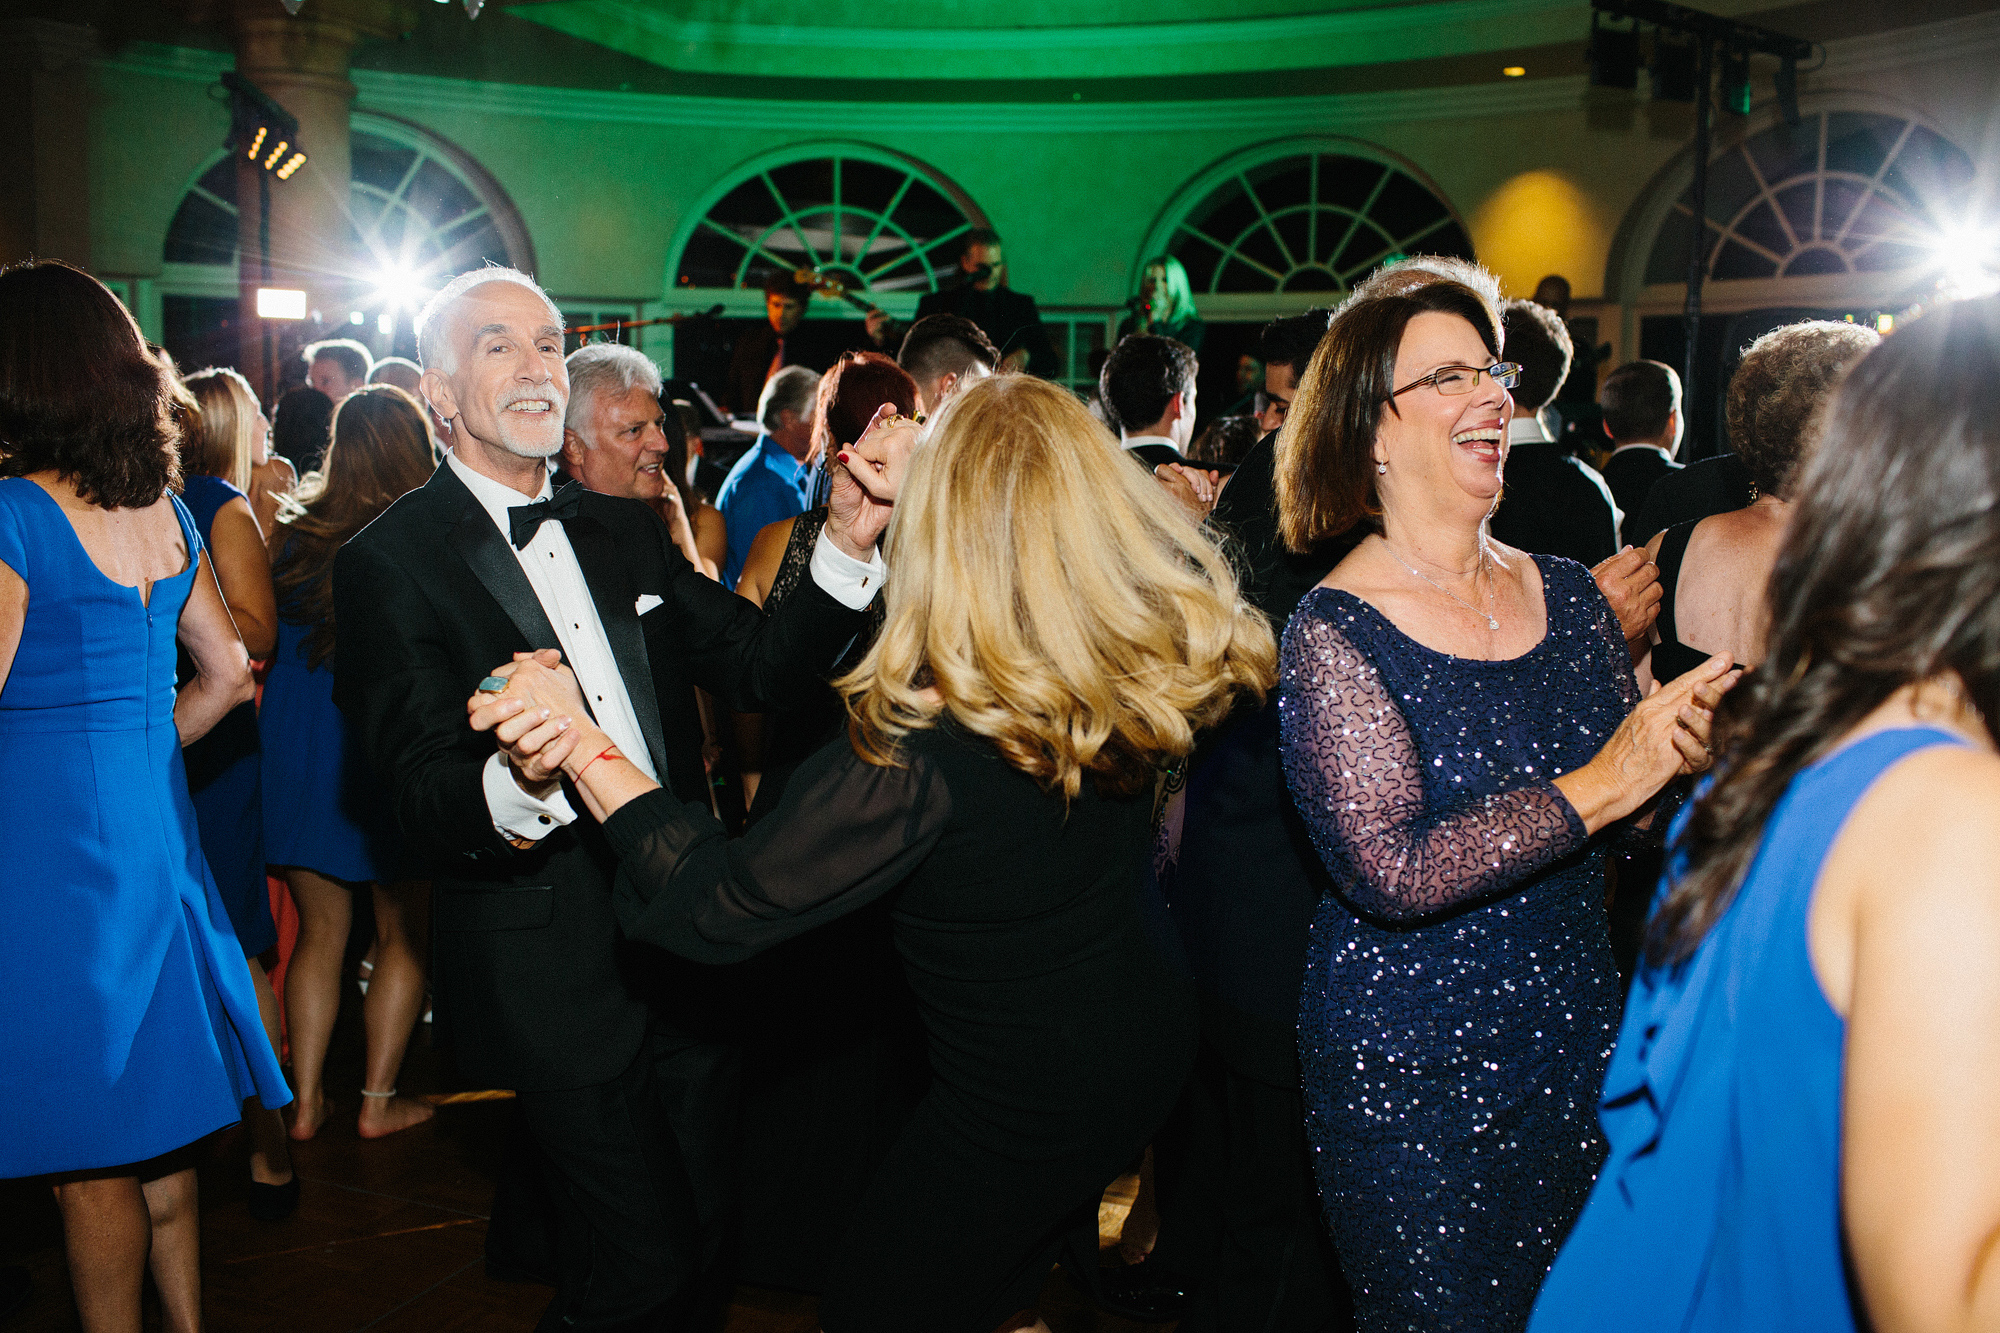 The guests dancing during the reception. 